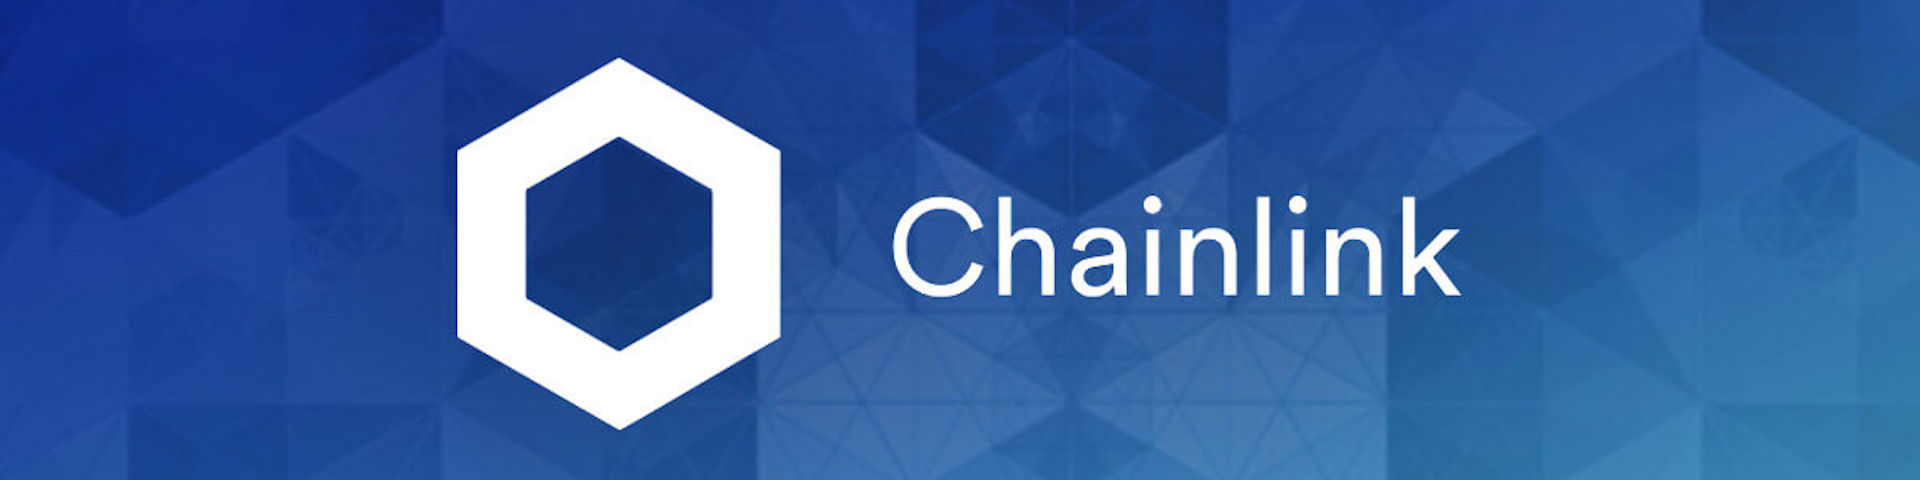 Why Chainlink is ready to explode in 2021